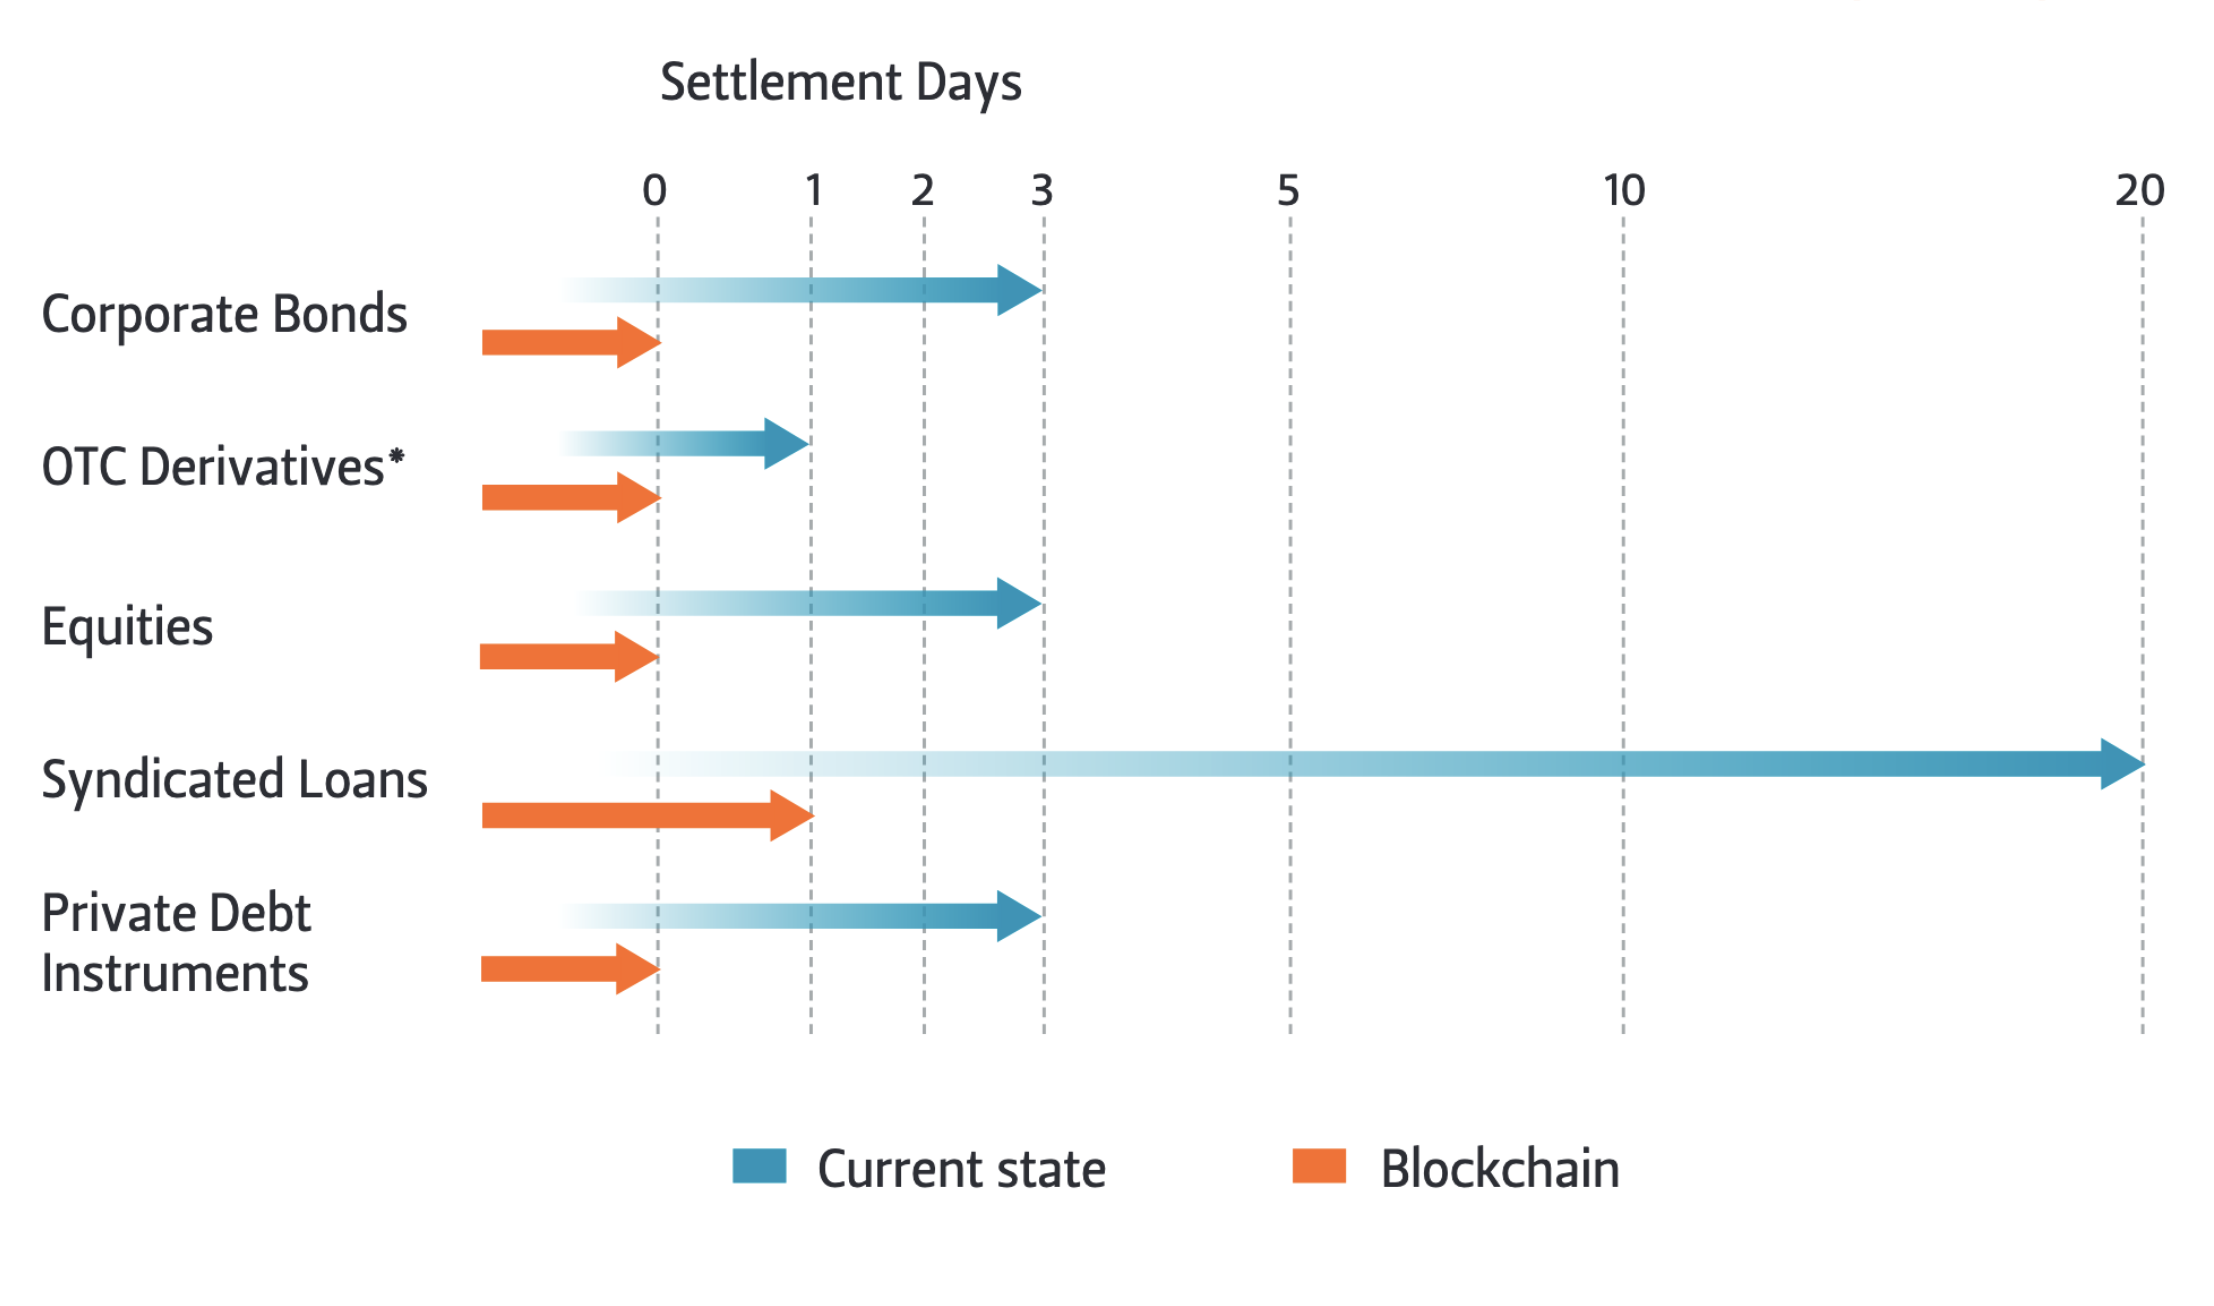 Settlement transaction time in days for corporate bonds, OTC derivatives, equities, syndicted loans, and private debt instruments (current state versus blockchain).